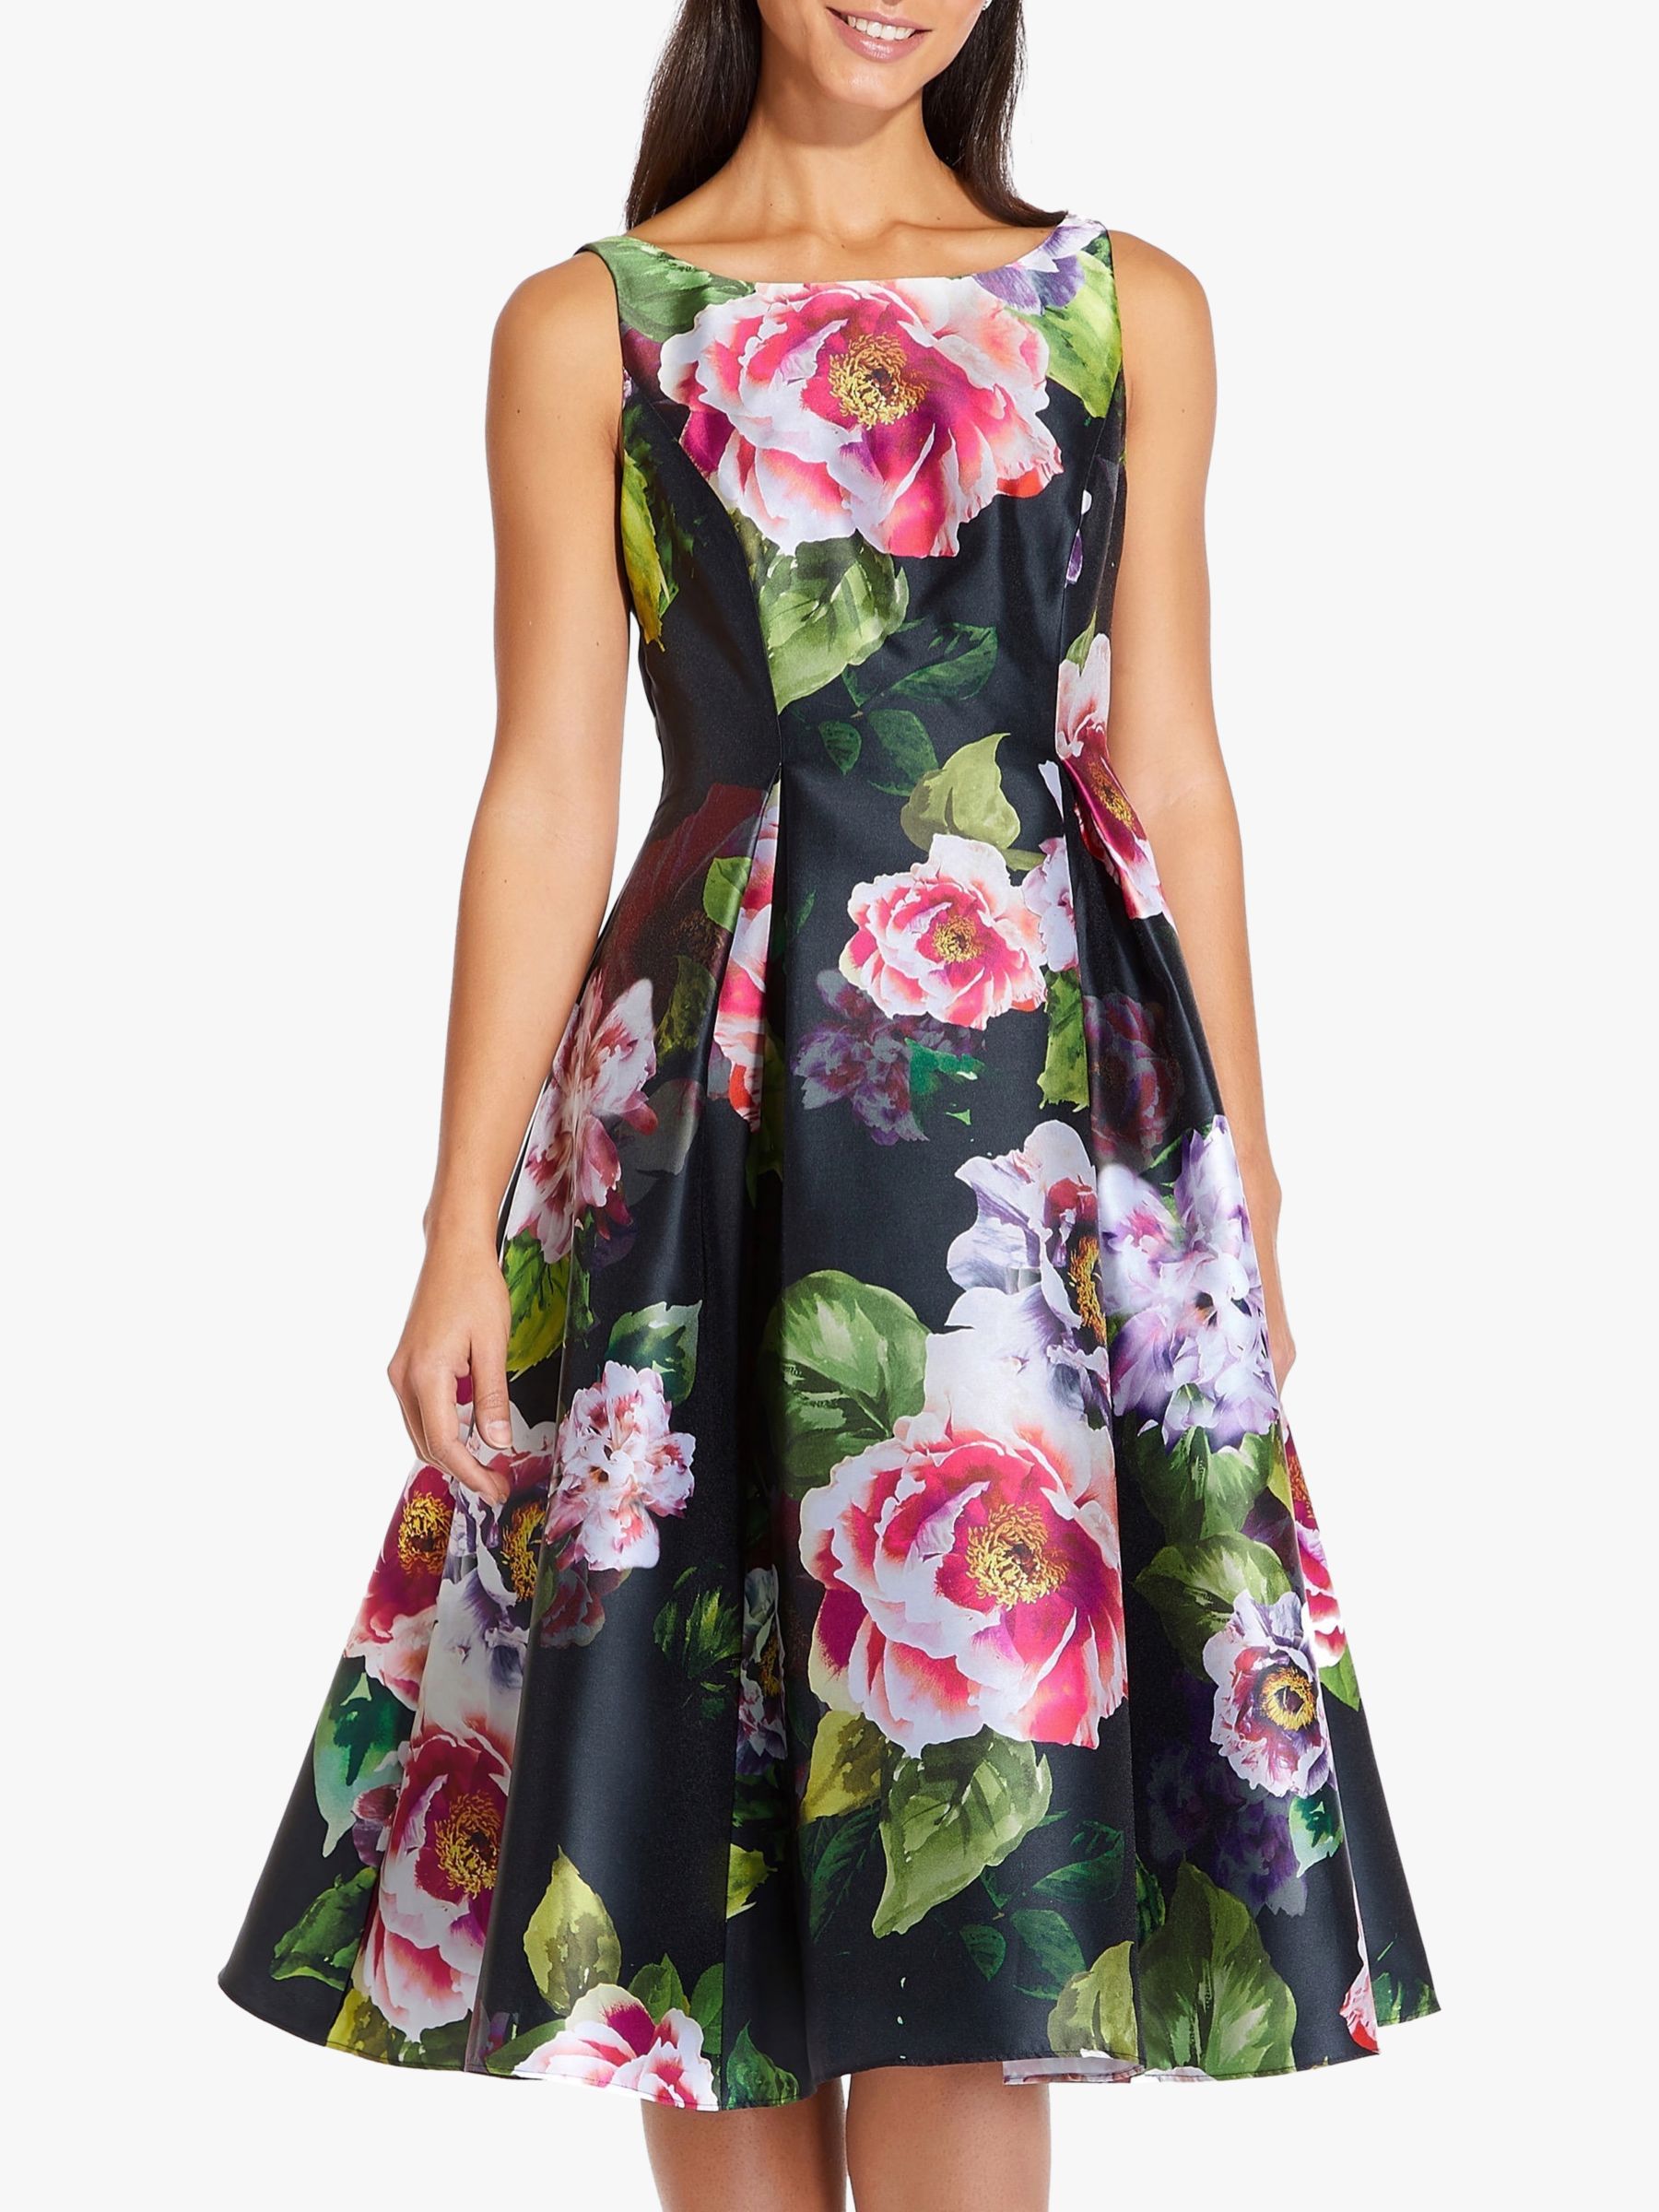 adrianna papell black floral dress